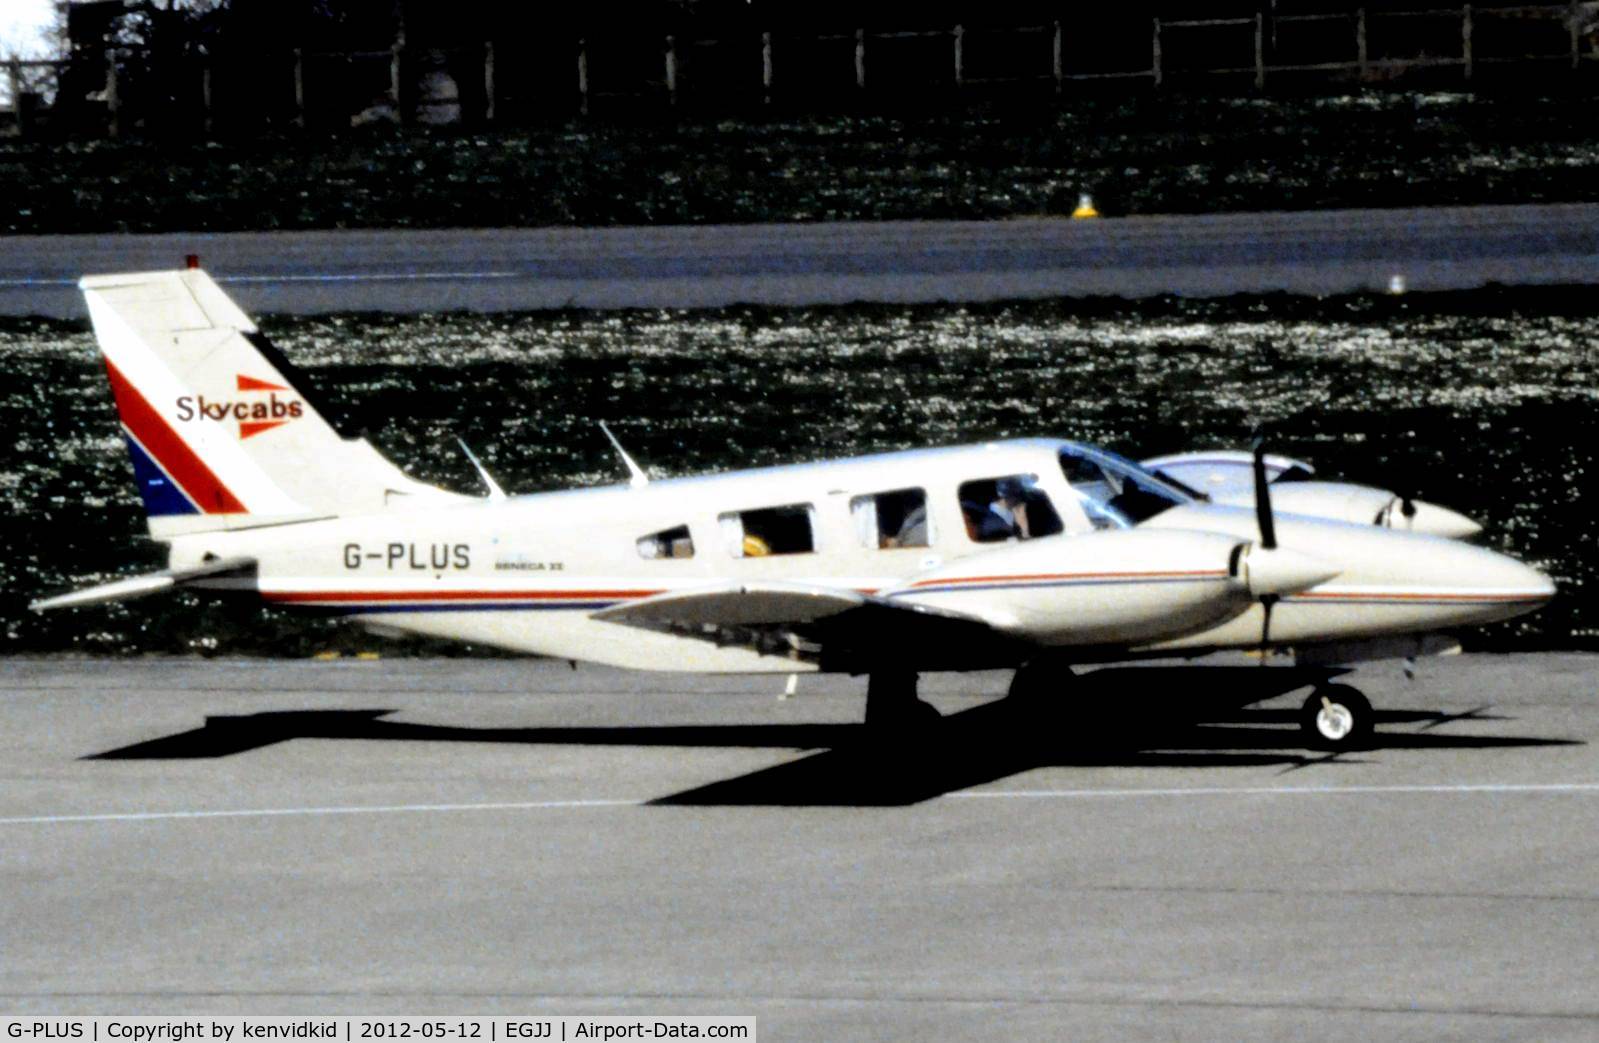 G-PLUS, 1980 Piper PA-34-200T Seneca II C/N 34-8070111, At Jersey airport early 1970's.
Scanned from slide.